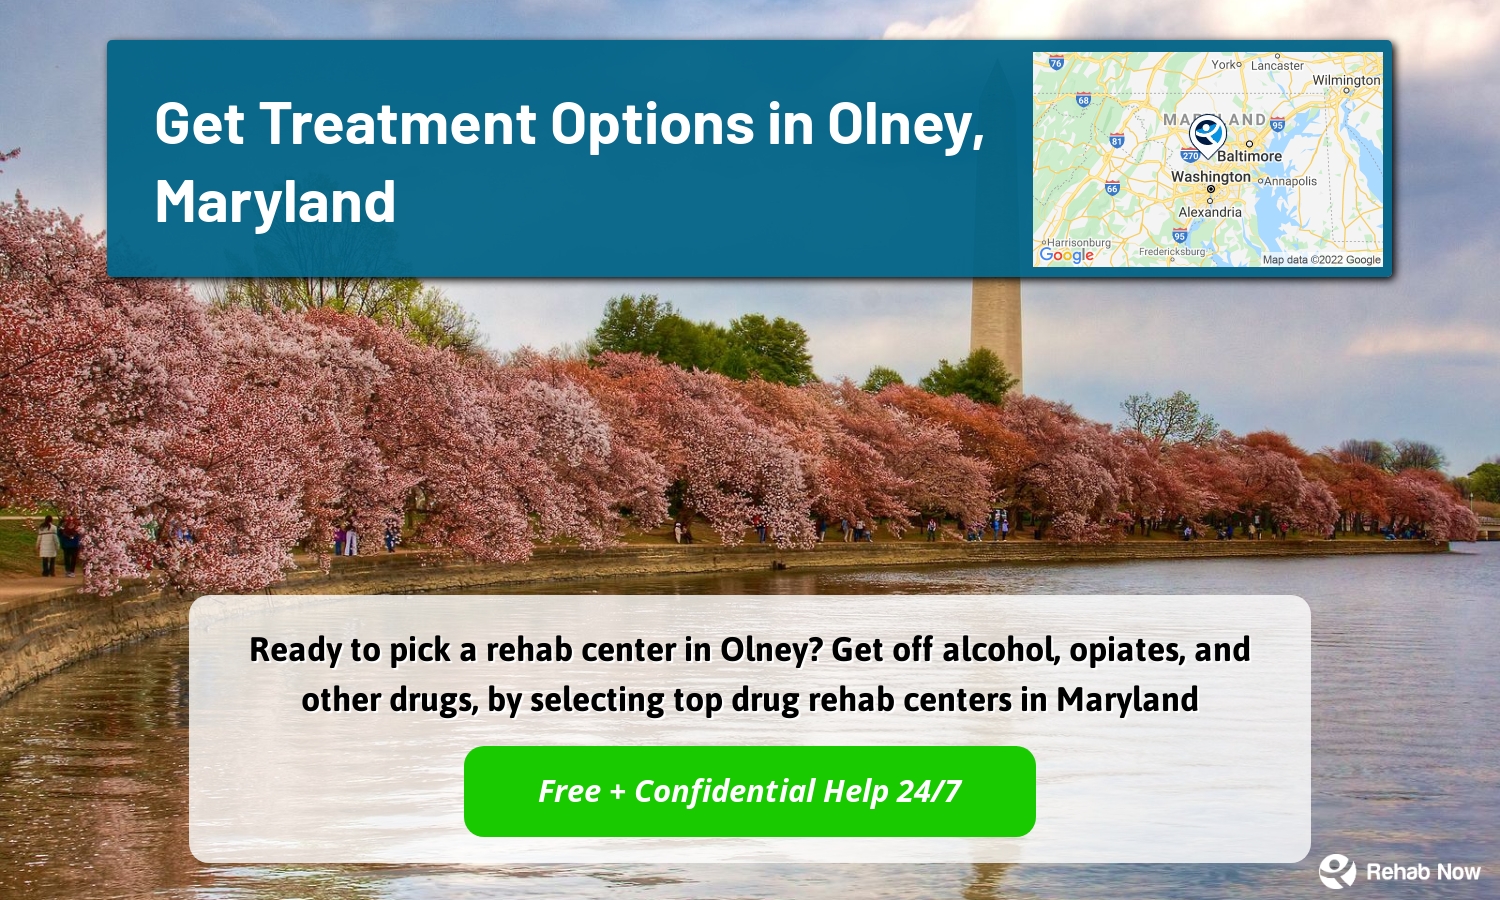 Ready to pick a rehab center in Olney? Get off alcohol, opiates, and other drugs, by selecting top drug rehab centers in Maryland